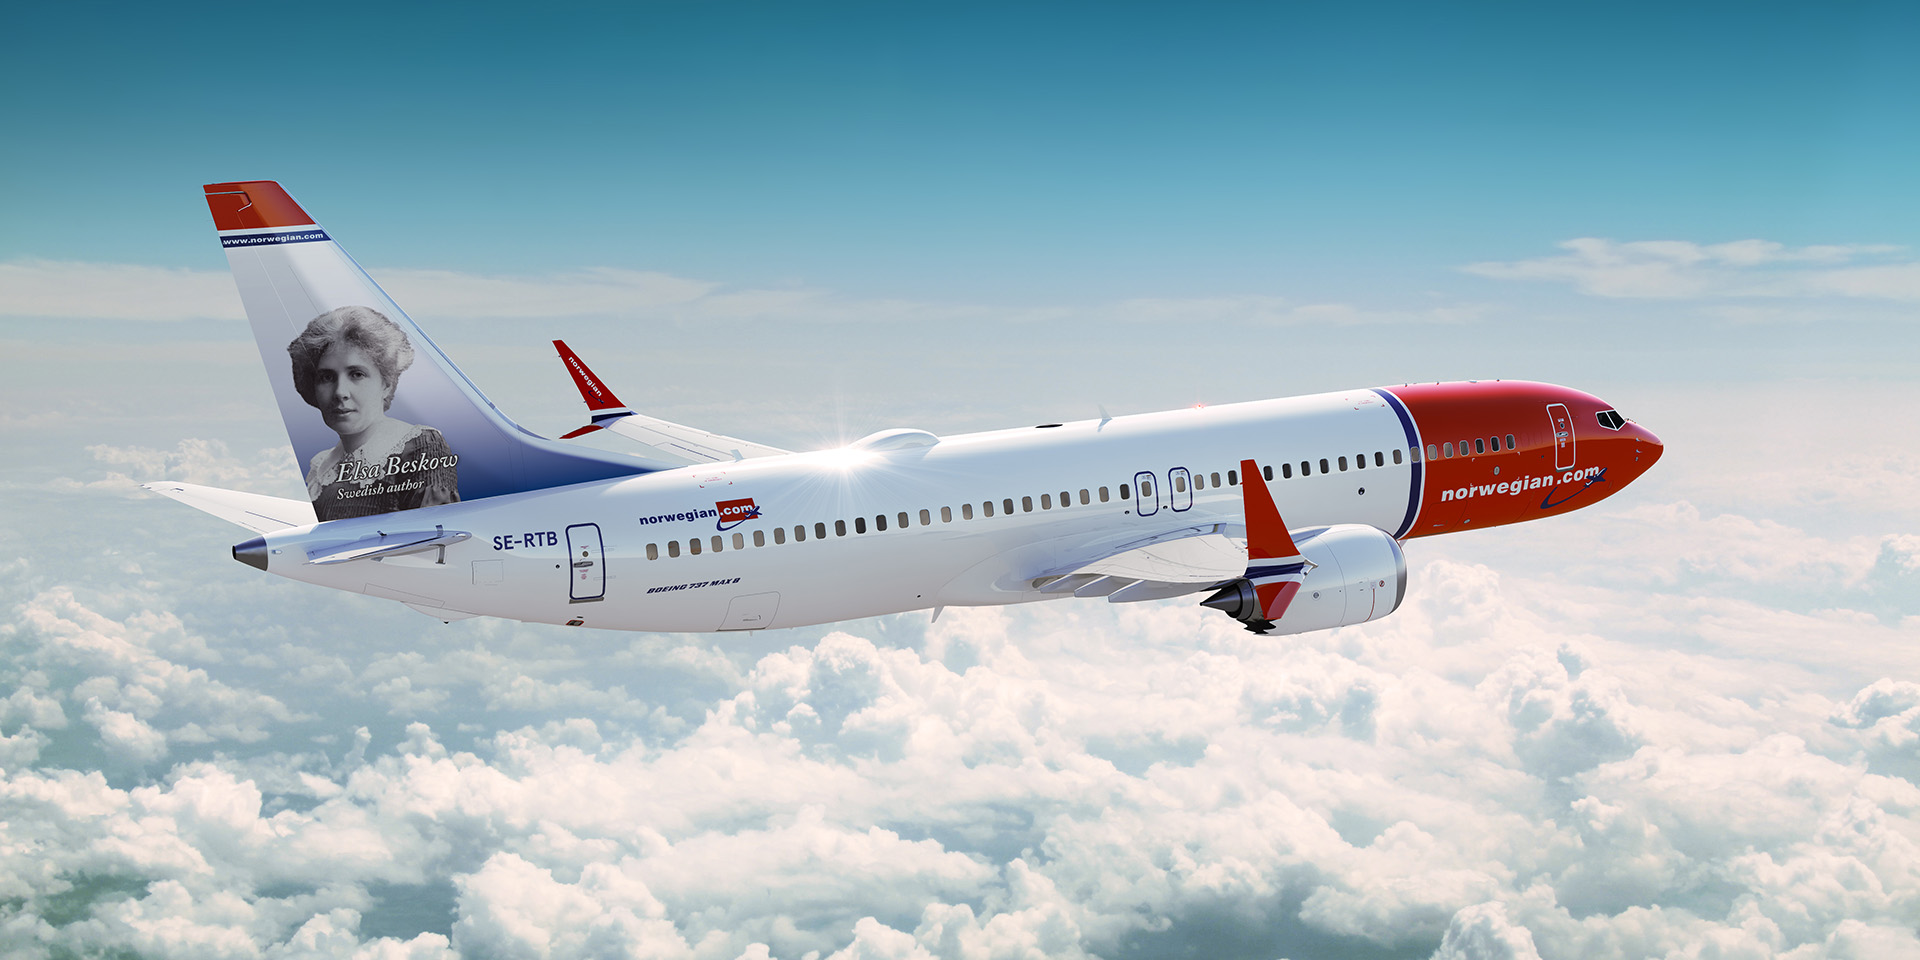 Norwegian concludes agreement to purchase 50 Boeing 737 MAX 8 aircraft